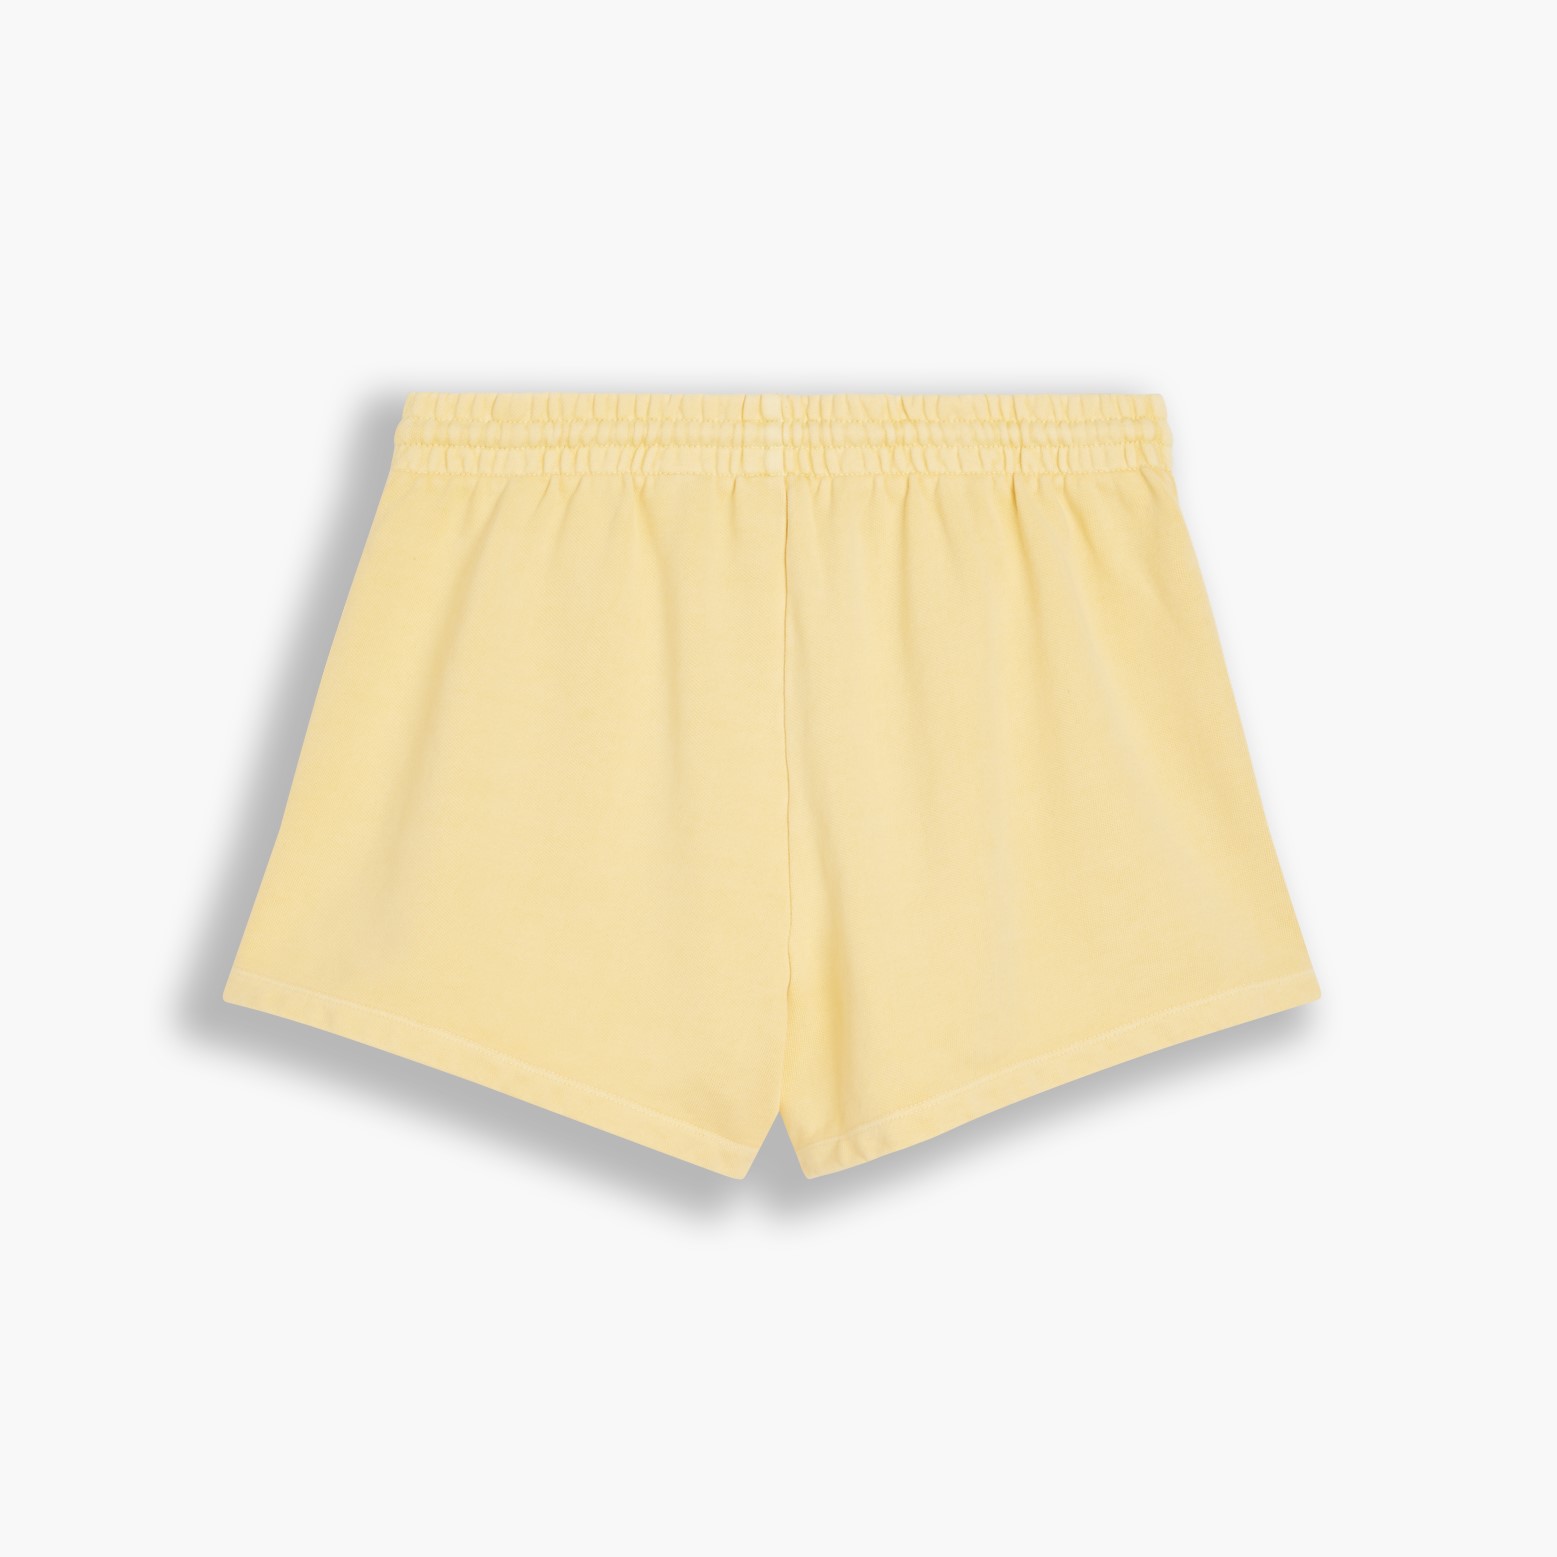 Levi’s®  - WOMEN'S SNACK SWEATSHORTS - Natural Dye Saturated Yellow